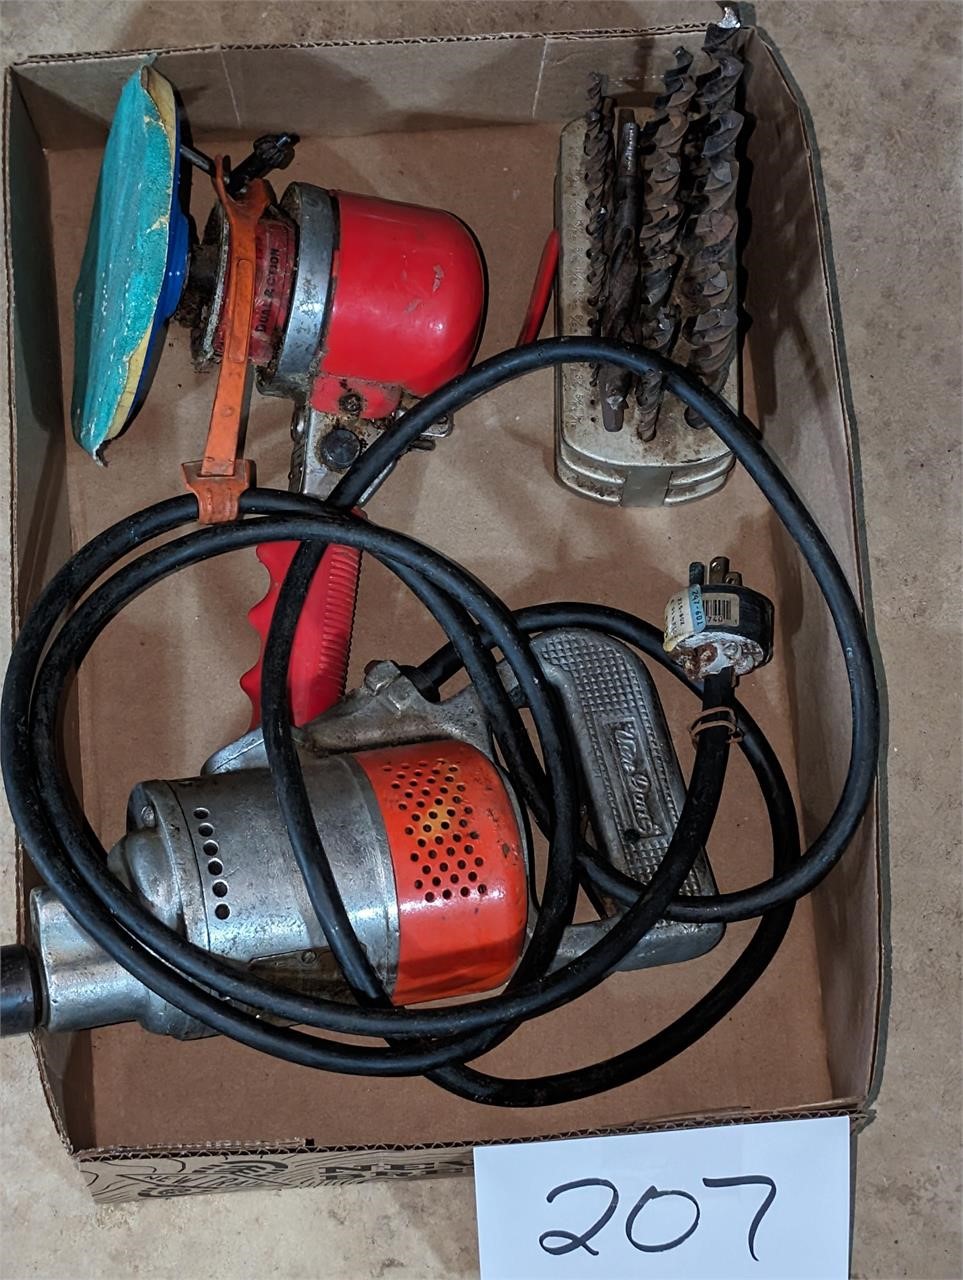 Electric Drill, Drill Bits, and Air Tool